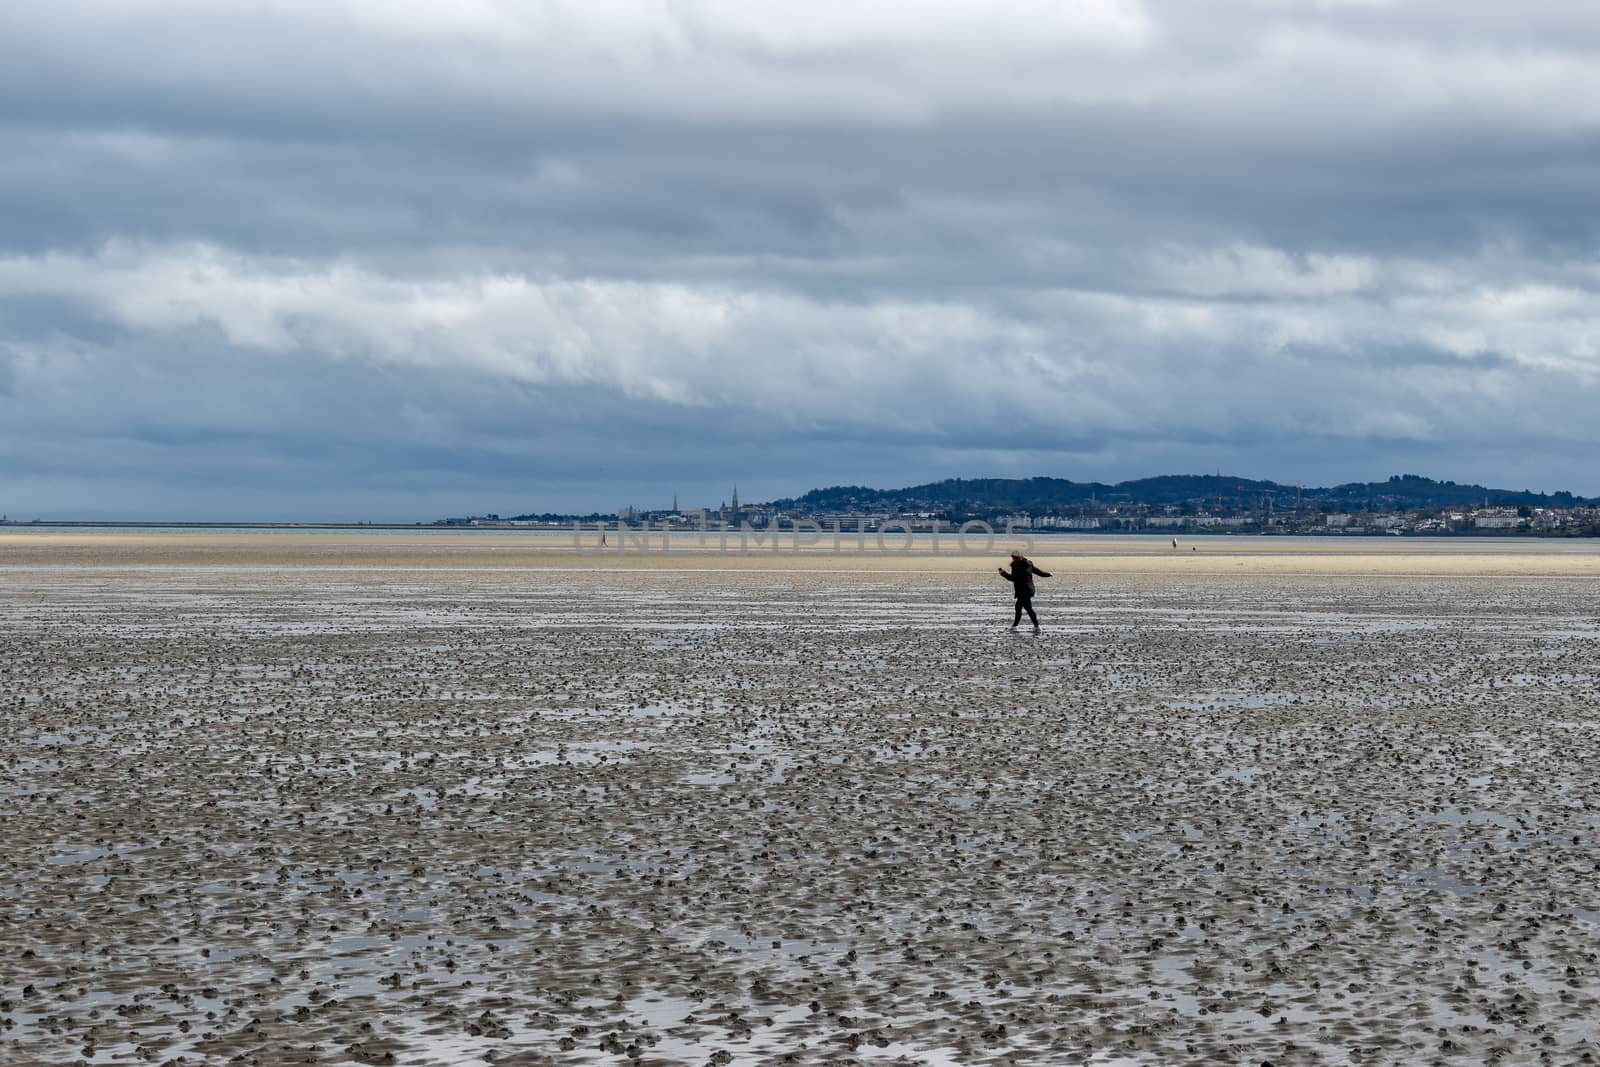 A woman maintaining social distancing walking outdoors on the beach in Dublin, Ireland by benentaylor